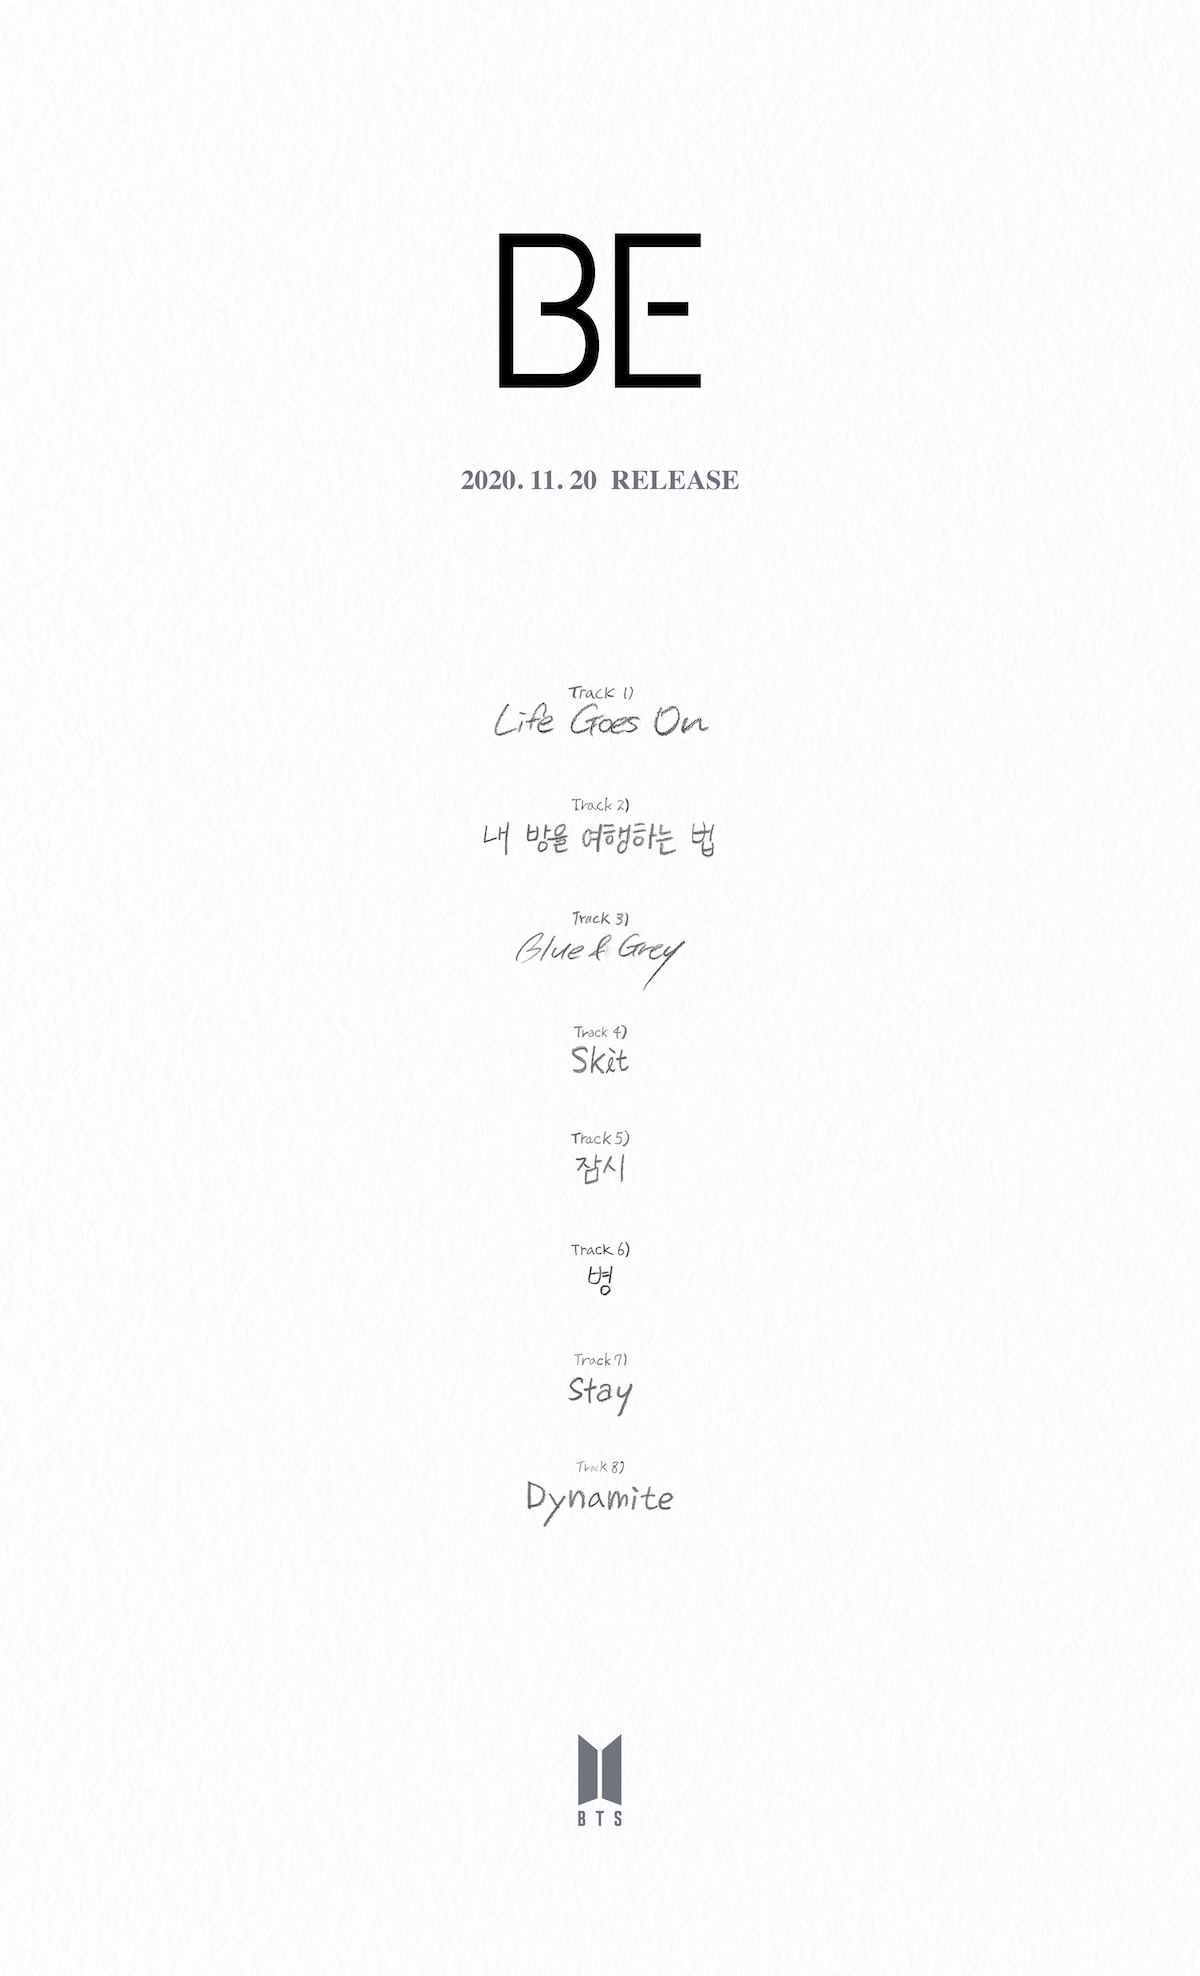 bts be album TRACKLIST BTS Reveal Tracklist for New Album BE (Deluxe Edition)